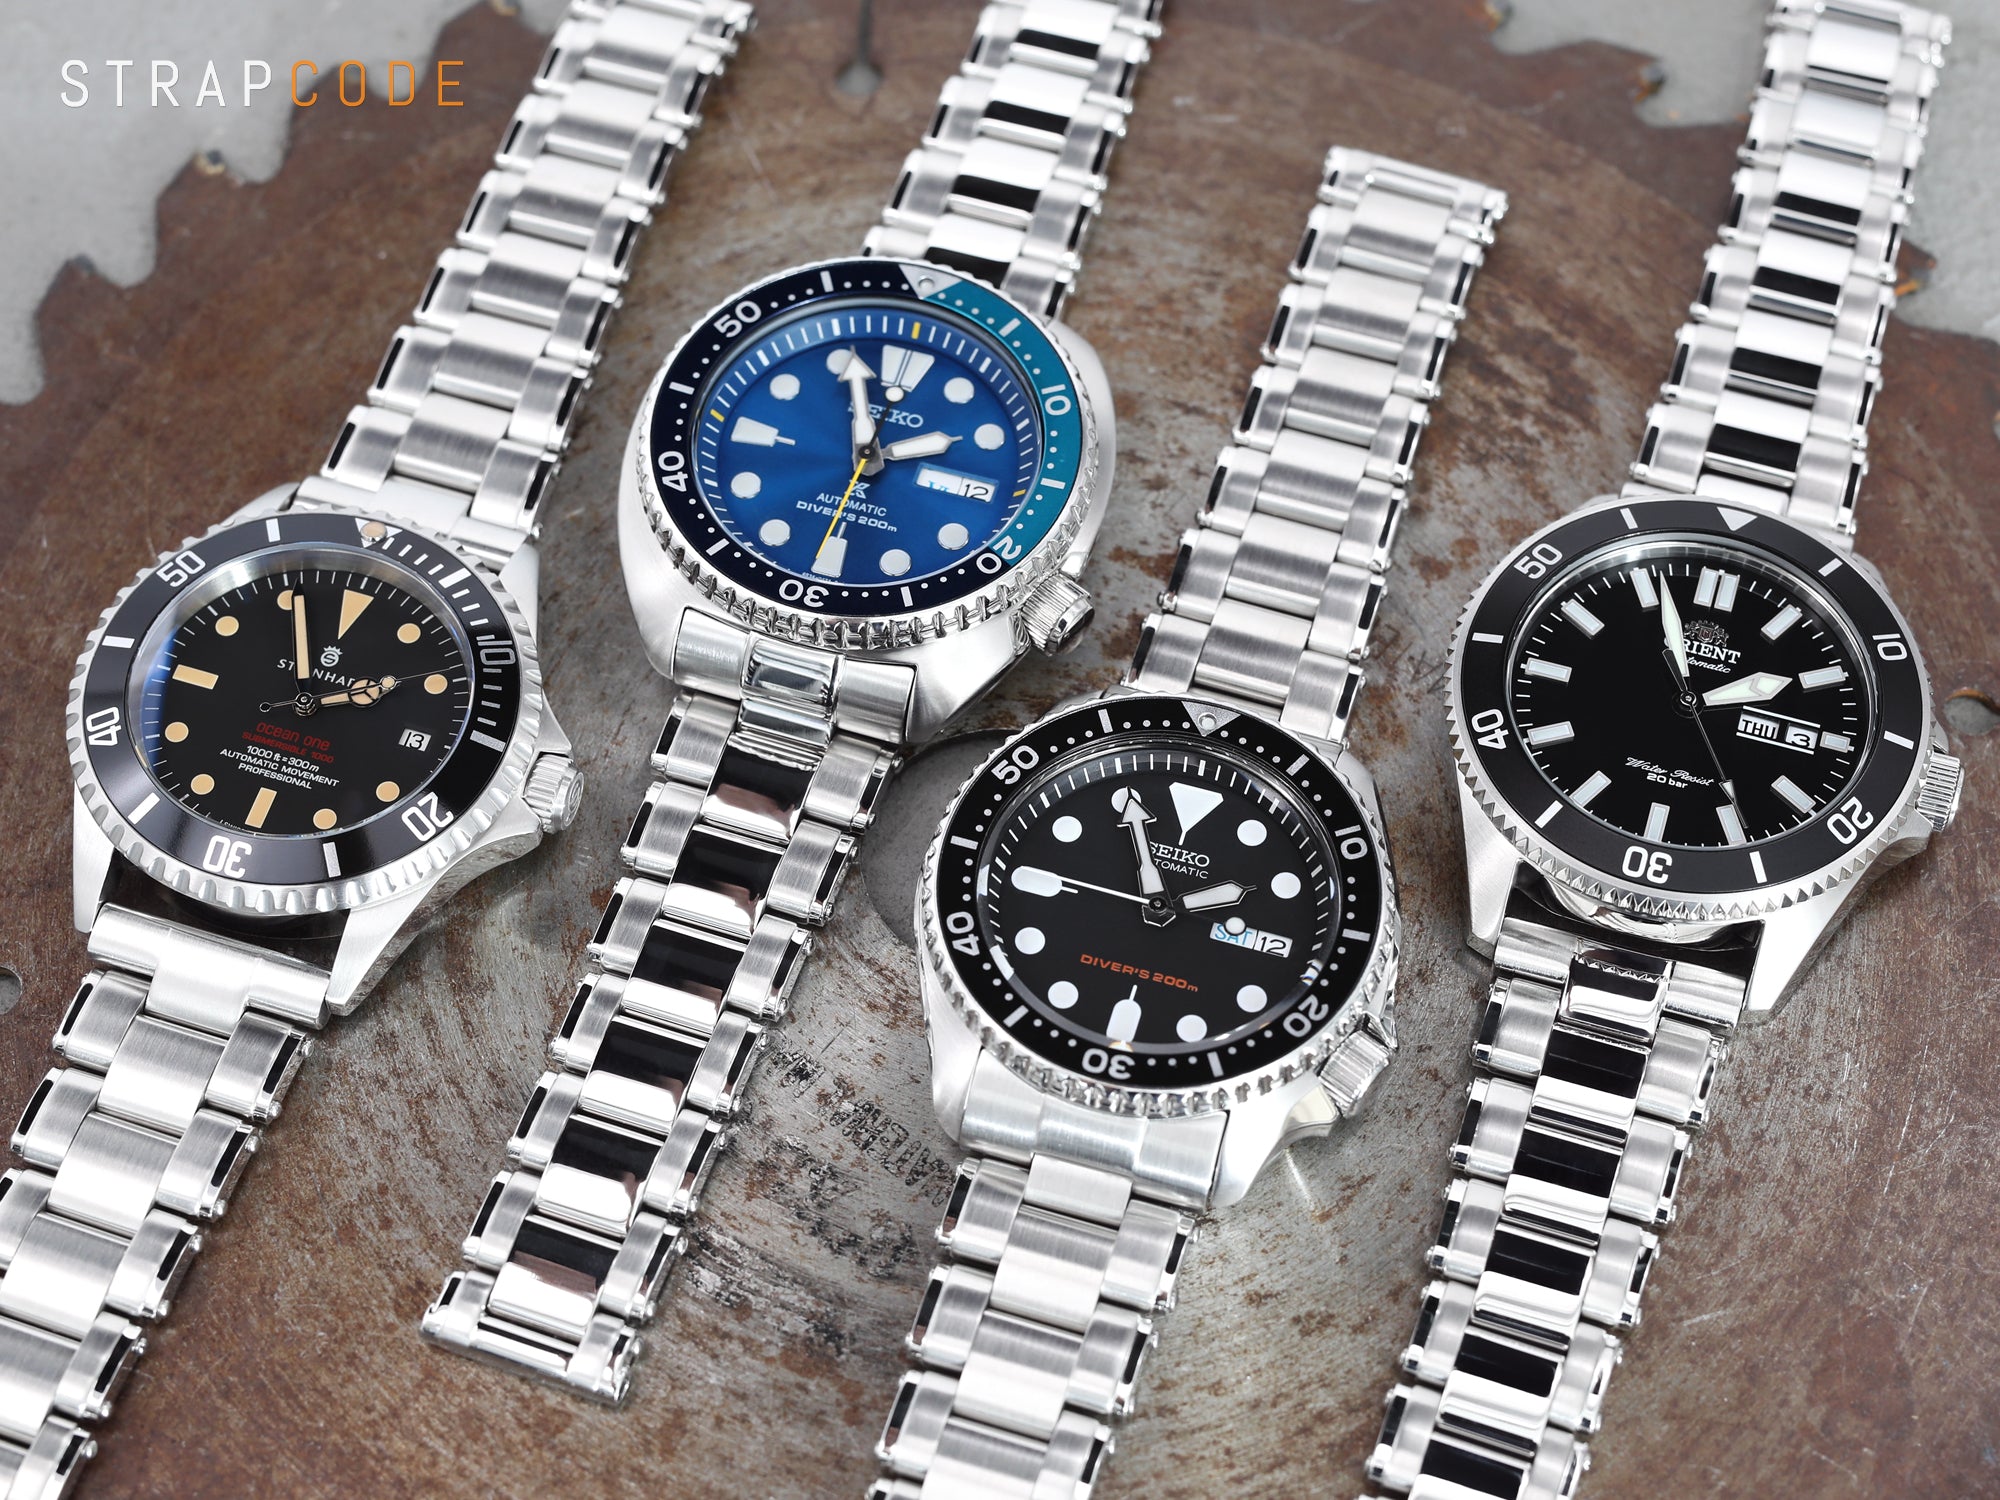 rolex stainless steel type